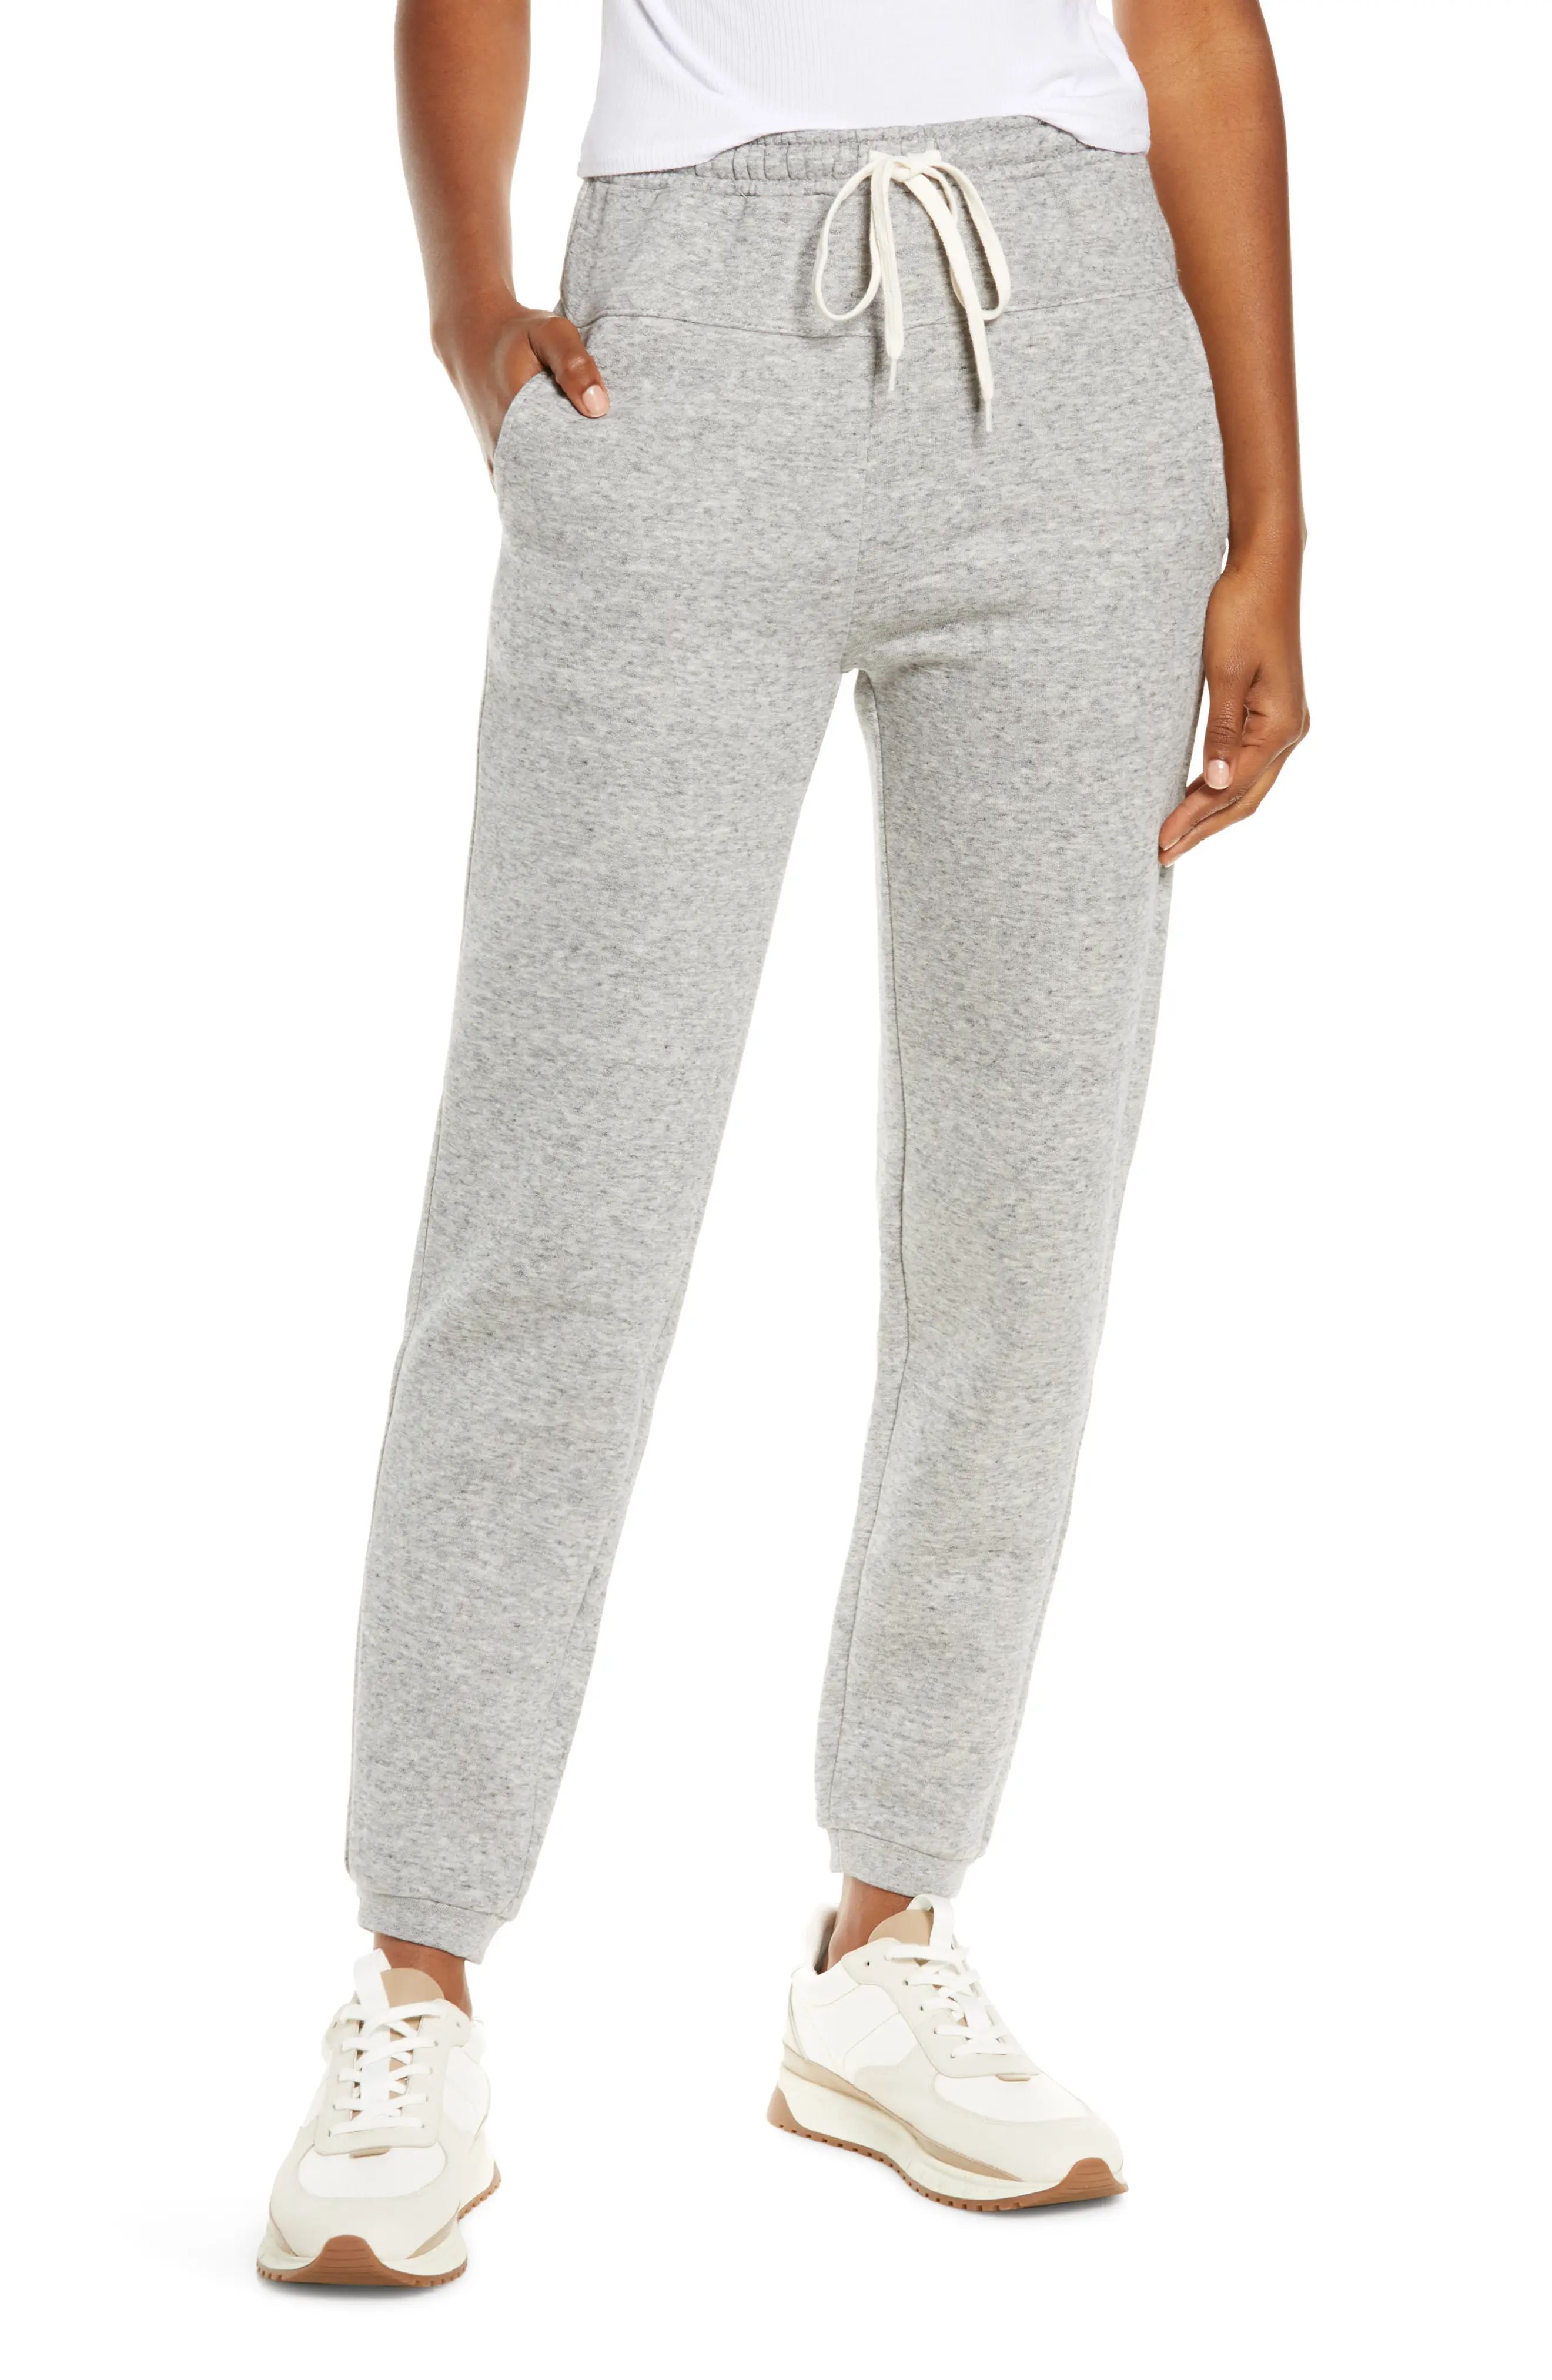 Madewell MWL Betterterry Jogger Sweatpants in Heather Pepper at Nordstrom, Size Small | Nordstrom